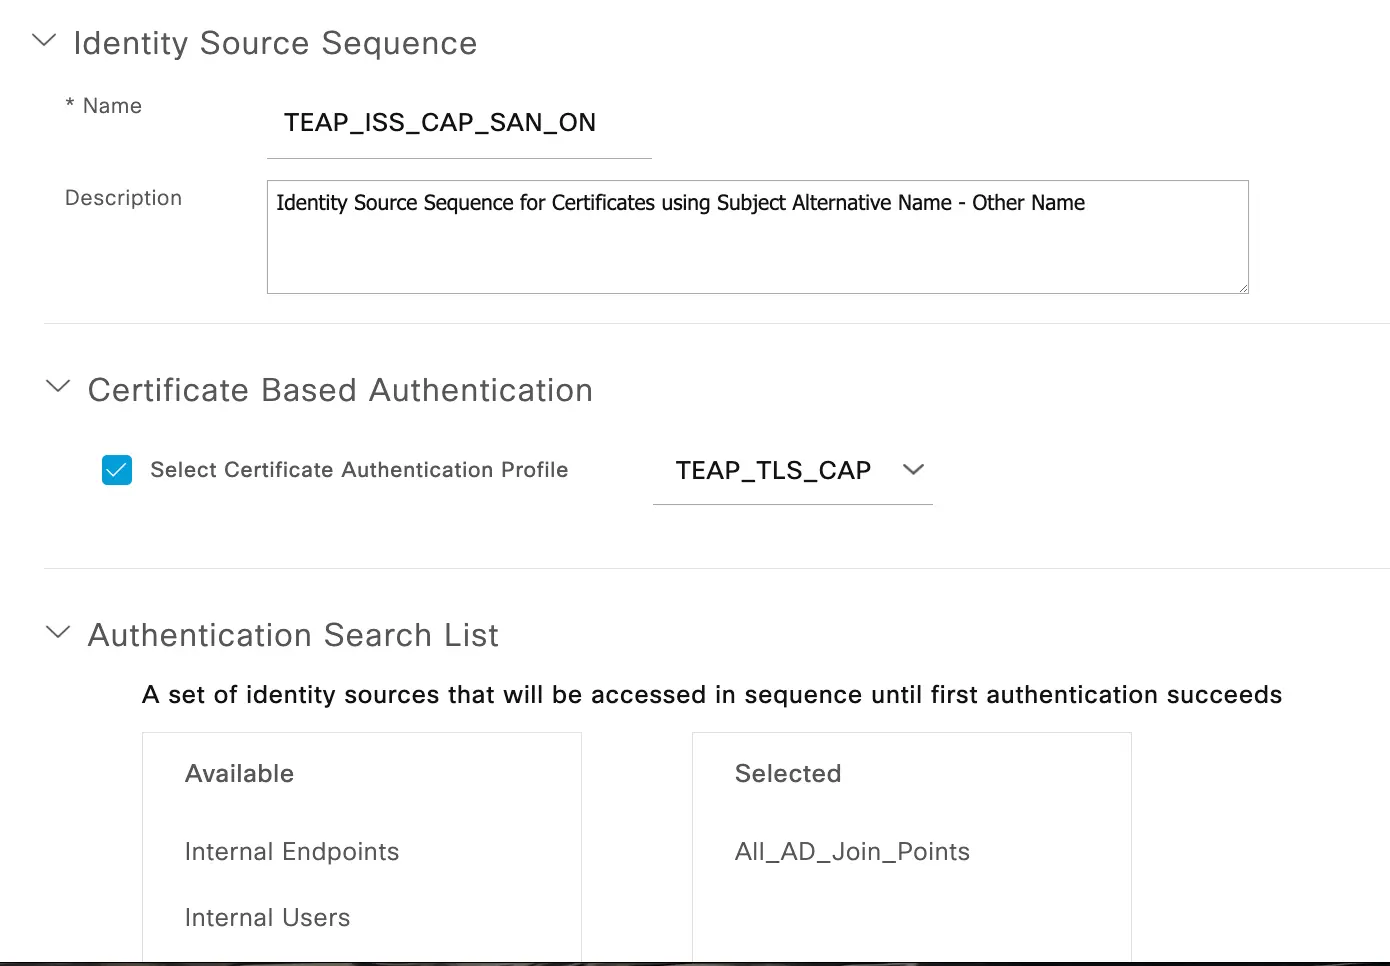 TEAP Identity Source Sequence with Certificate Authentication Profile